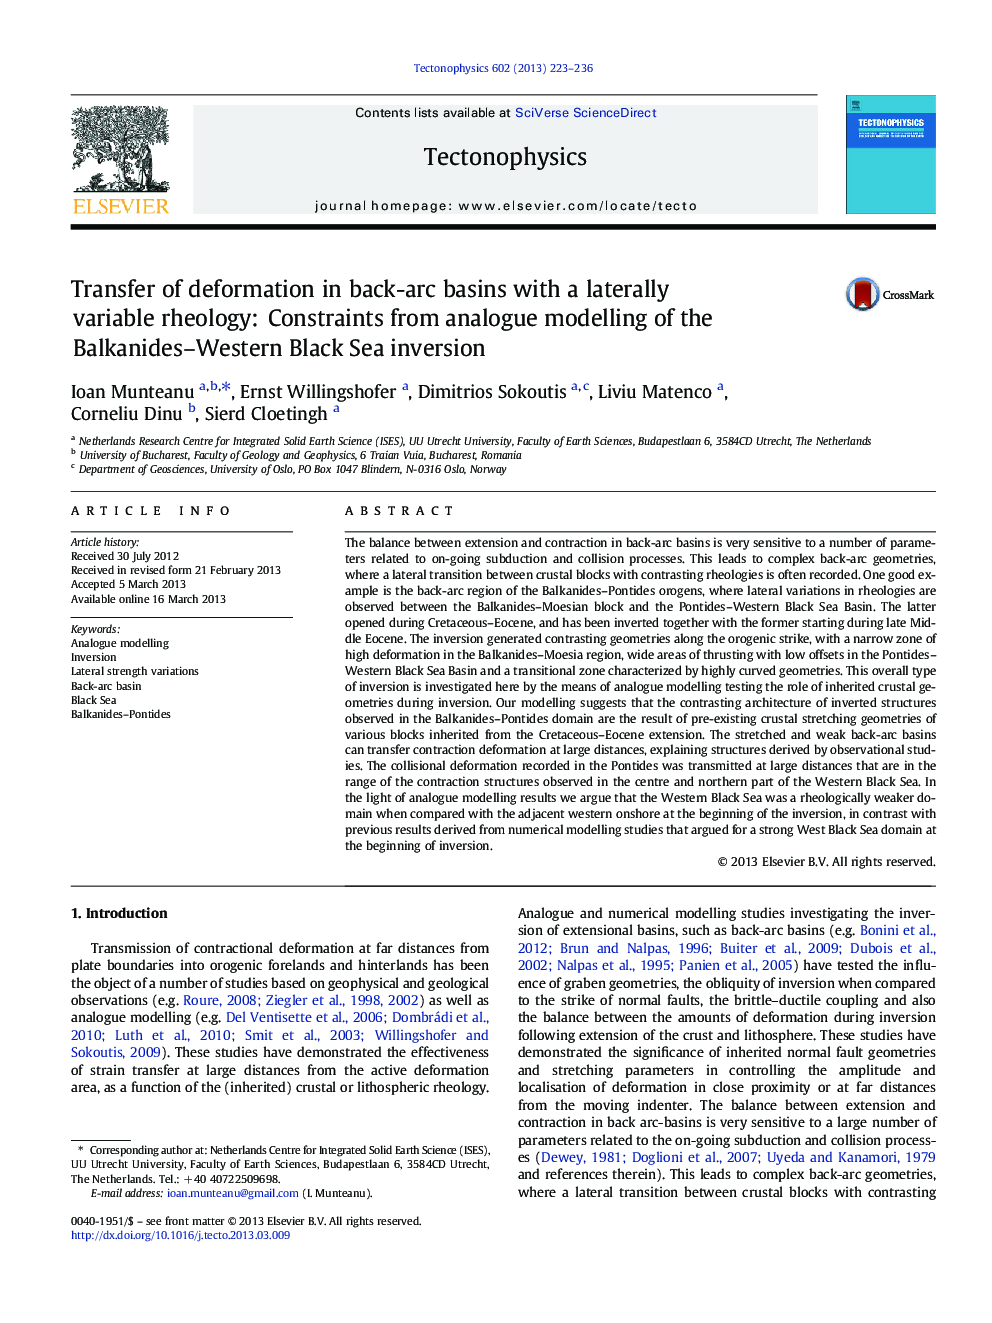 Transfer of deformation in back-arc basins with a laterally variable rheology: Constraints from analogue modelling of the Balkanides–Western Black Sea inversion